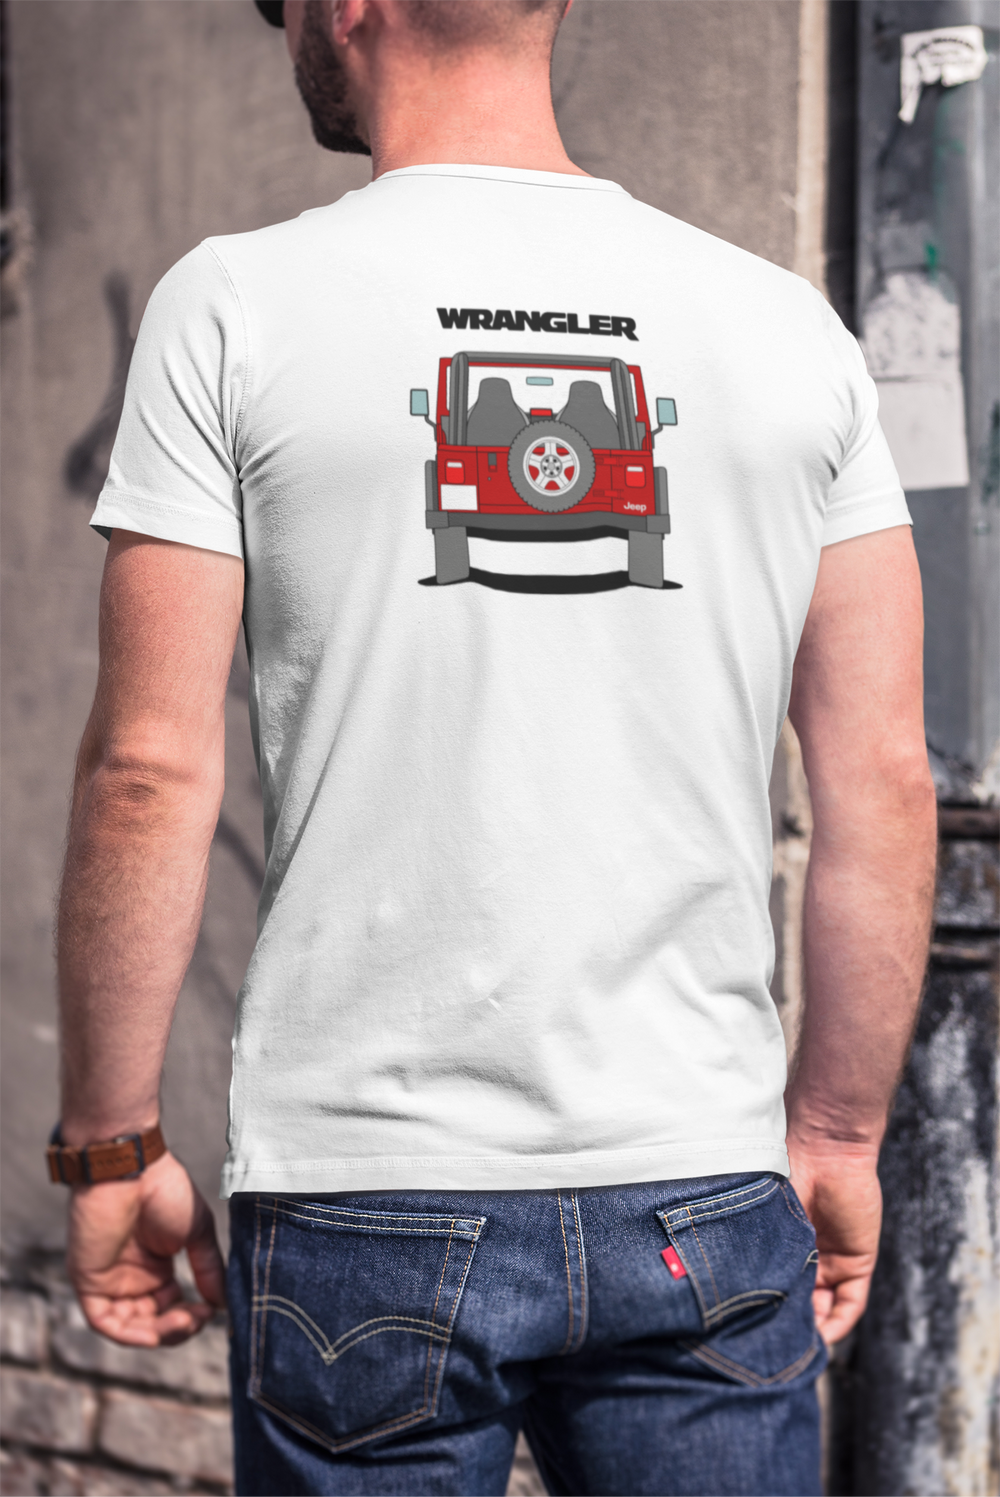 JEEP WILLYS T-SHIRT